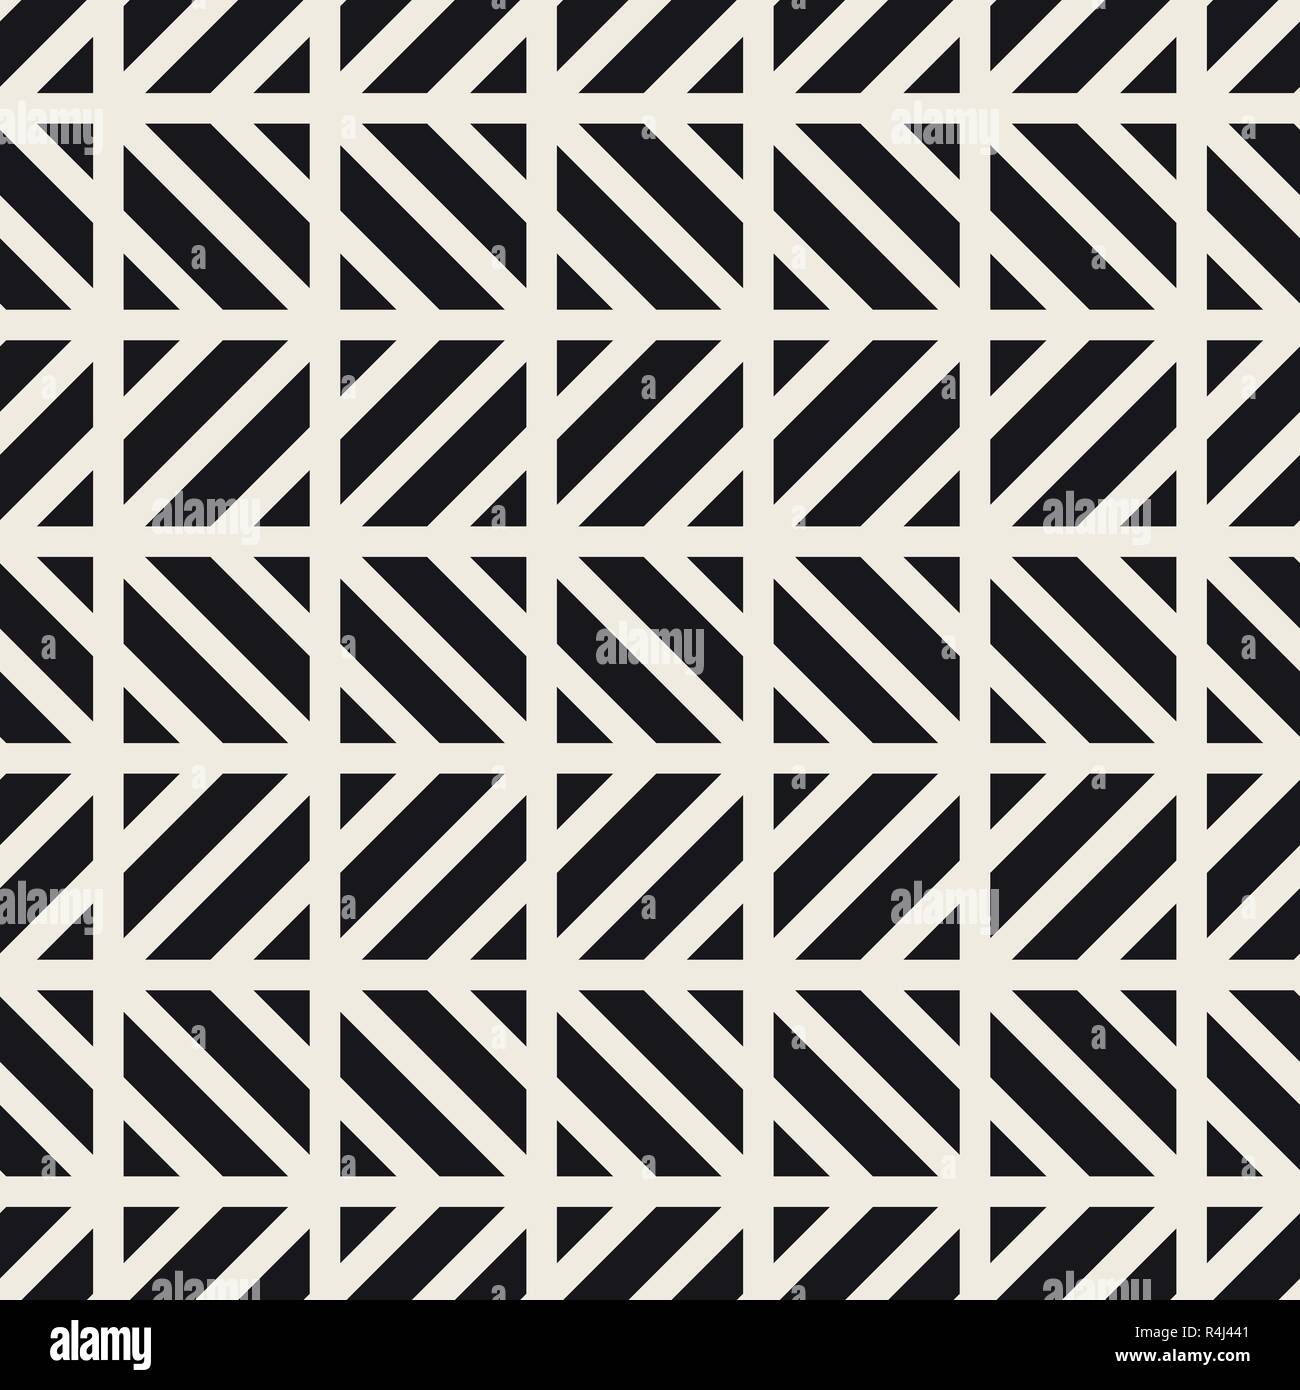 Vector seamless pattern. Stylish monochrome background. Repeating geometric square tiles with slanted stripes. Stock Vector